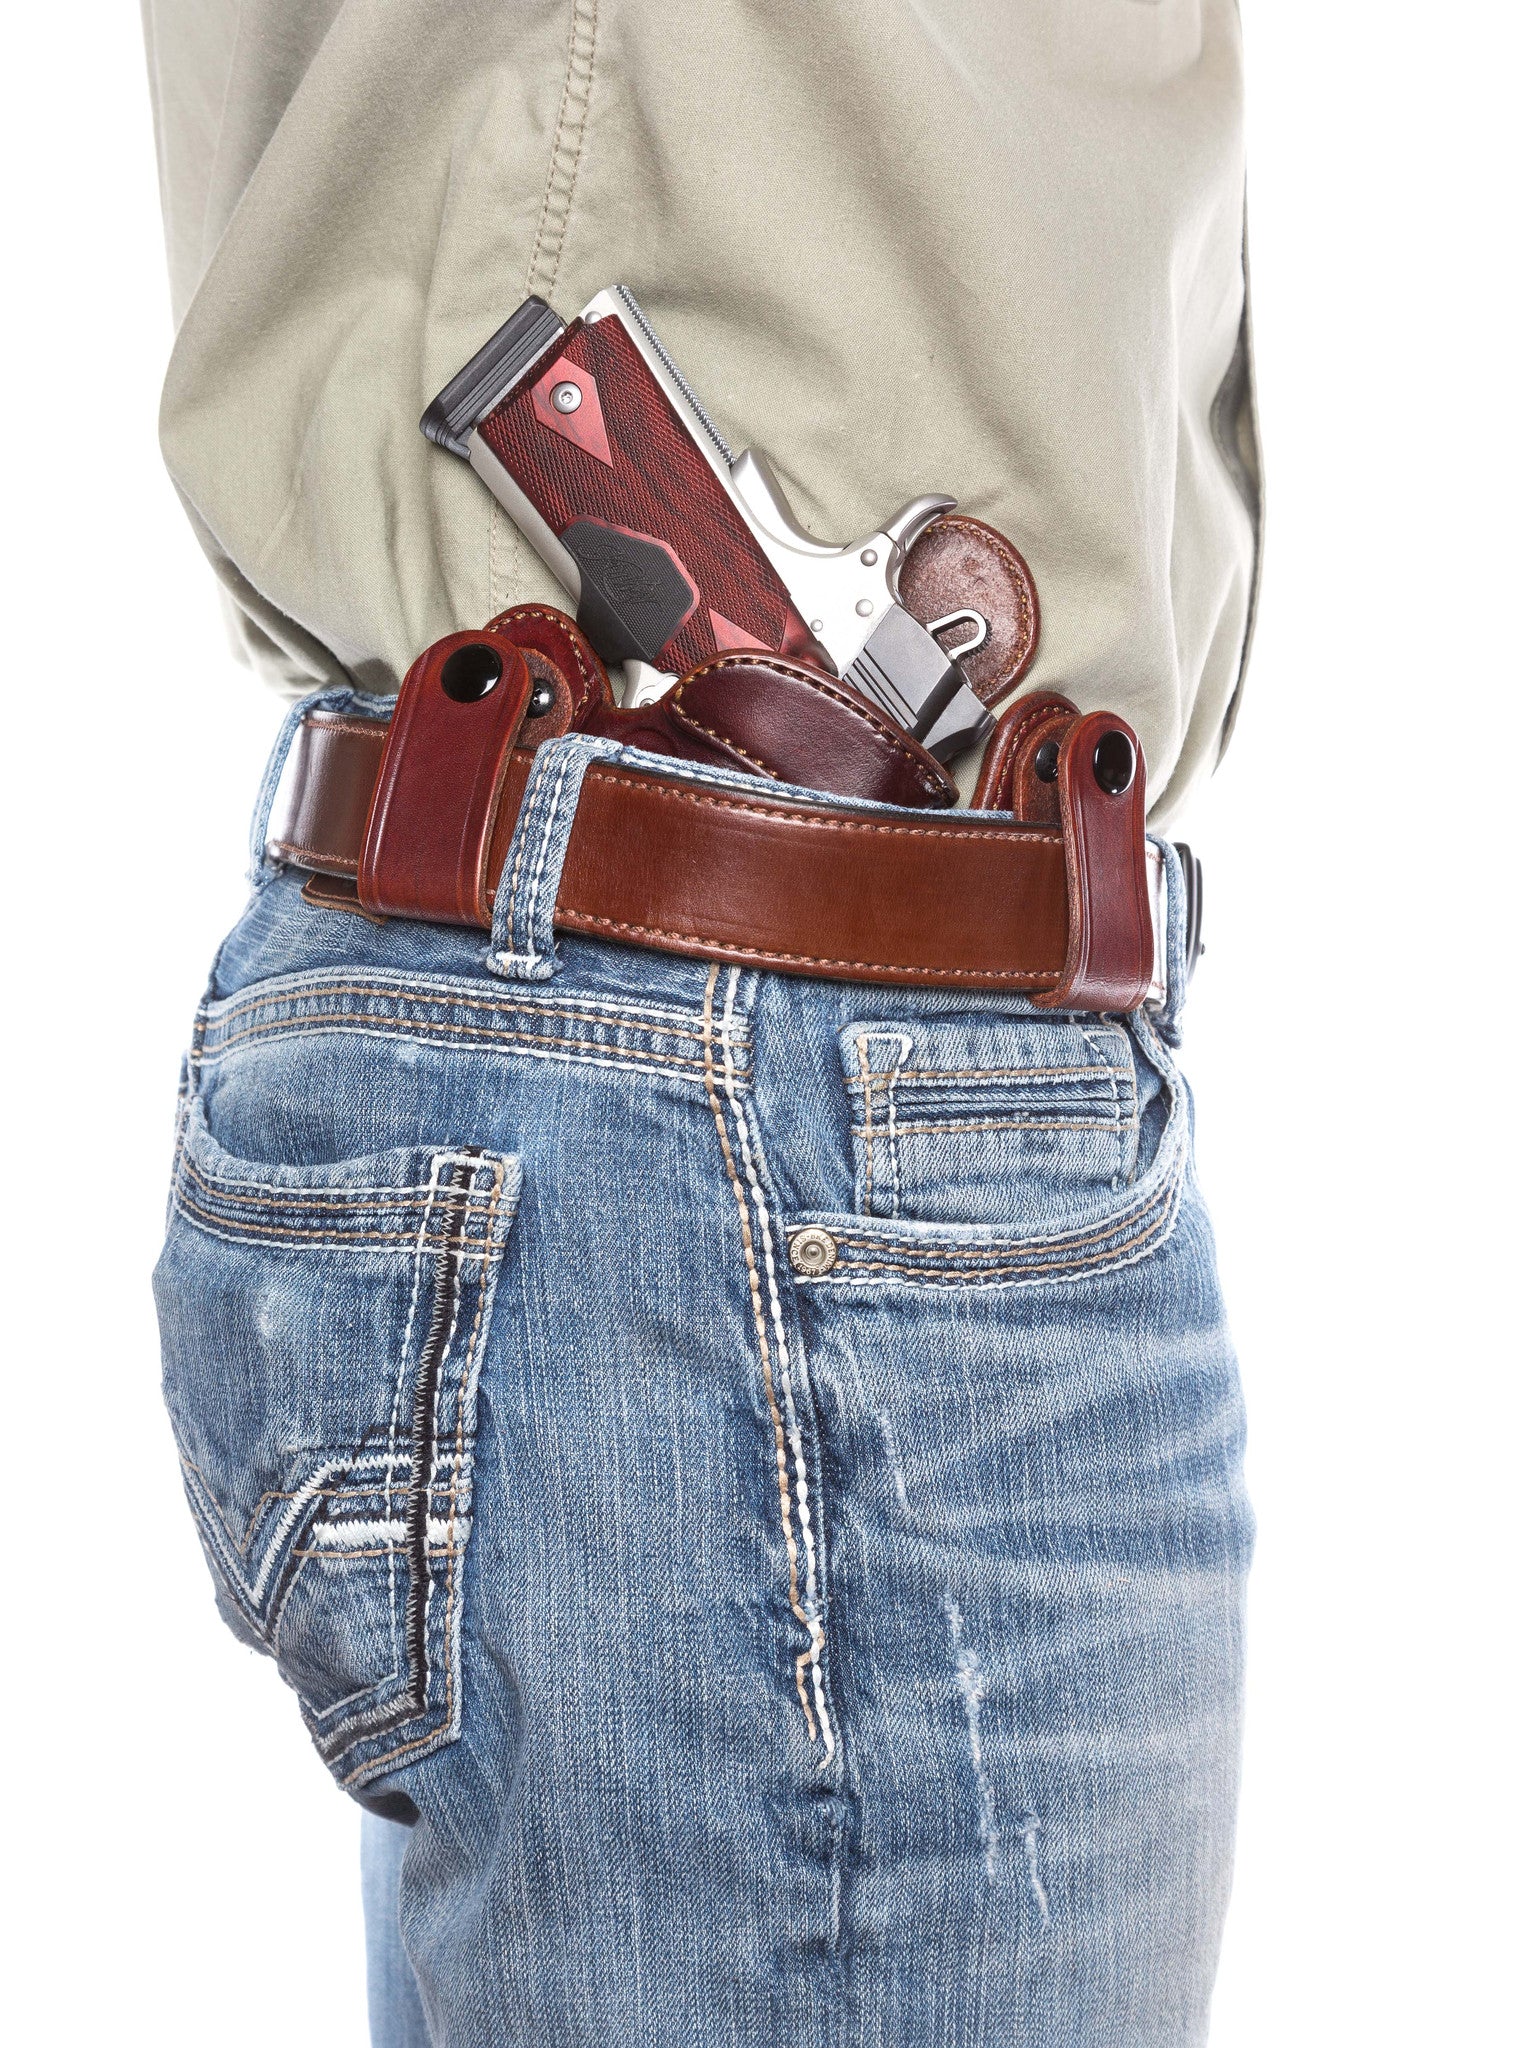 Comfortable Concealed Carry Holsters